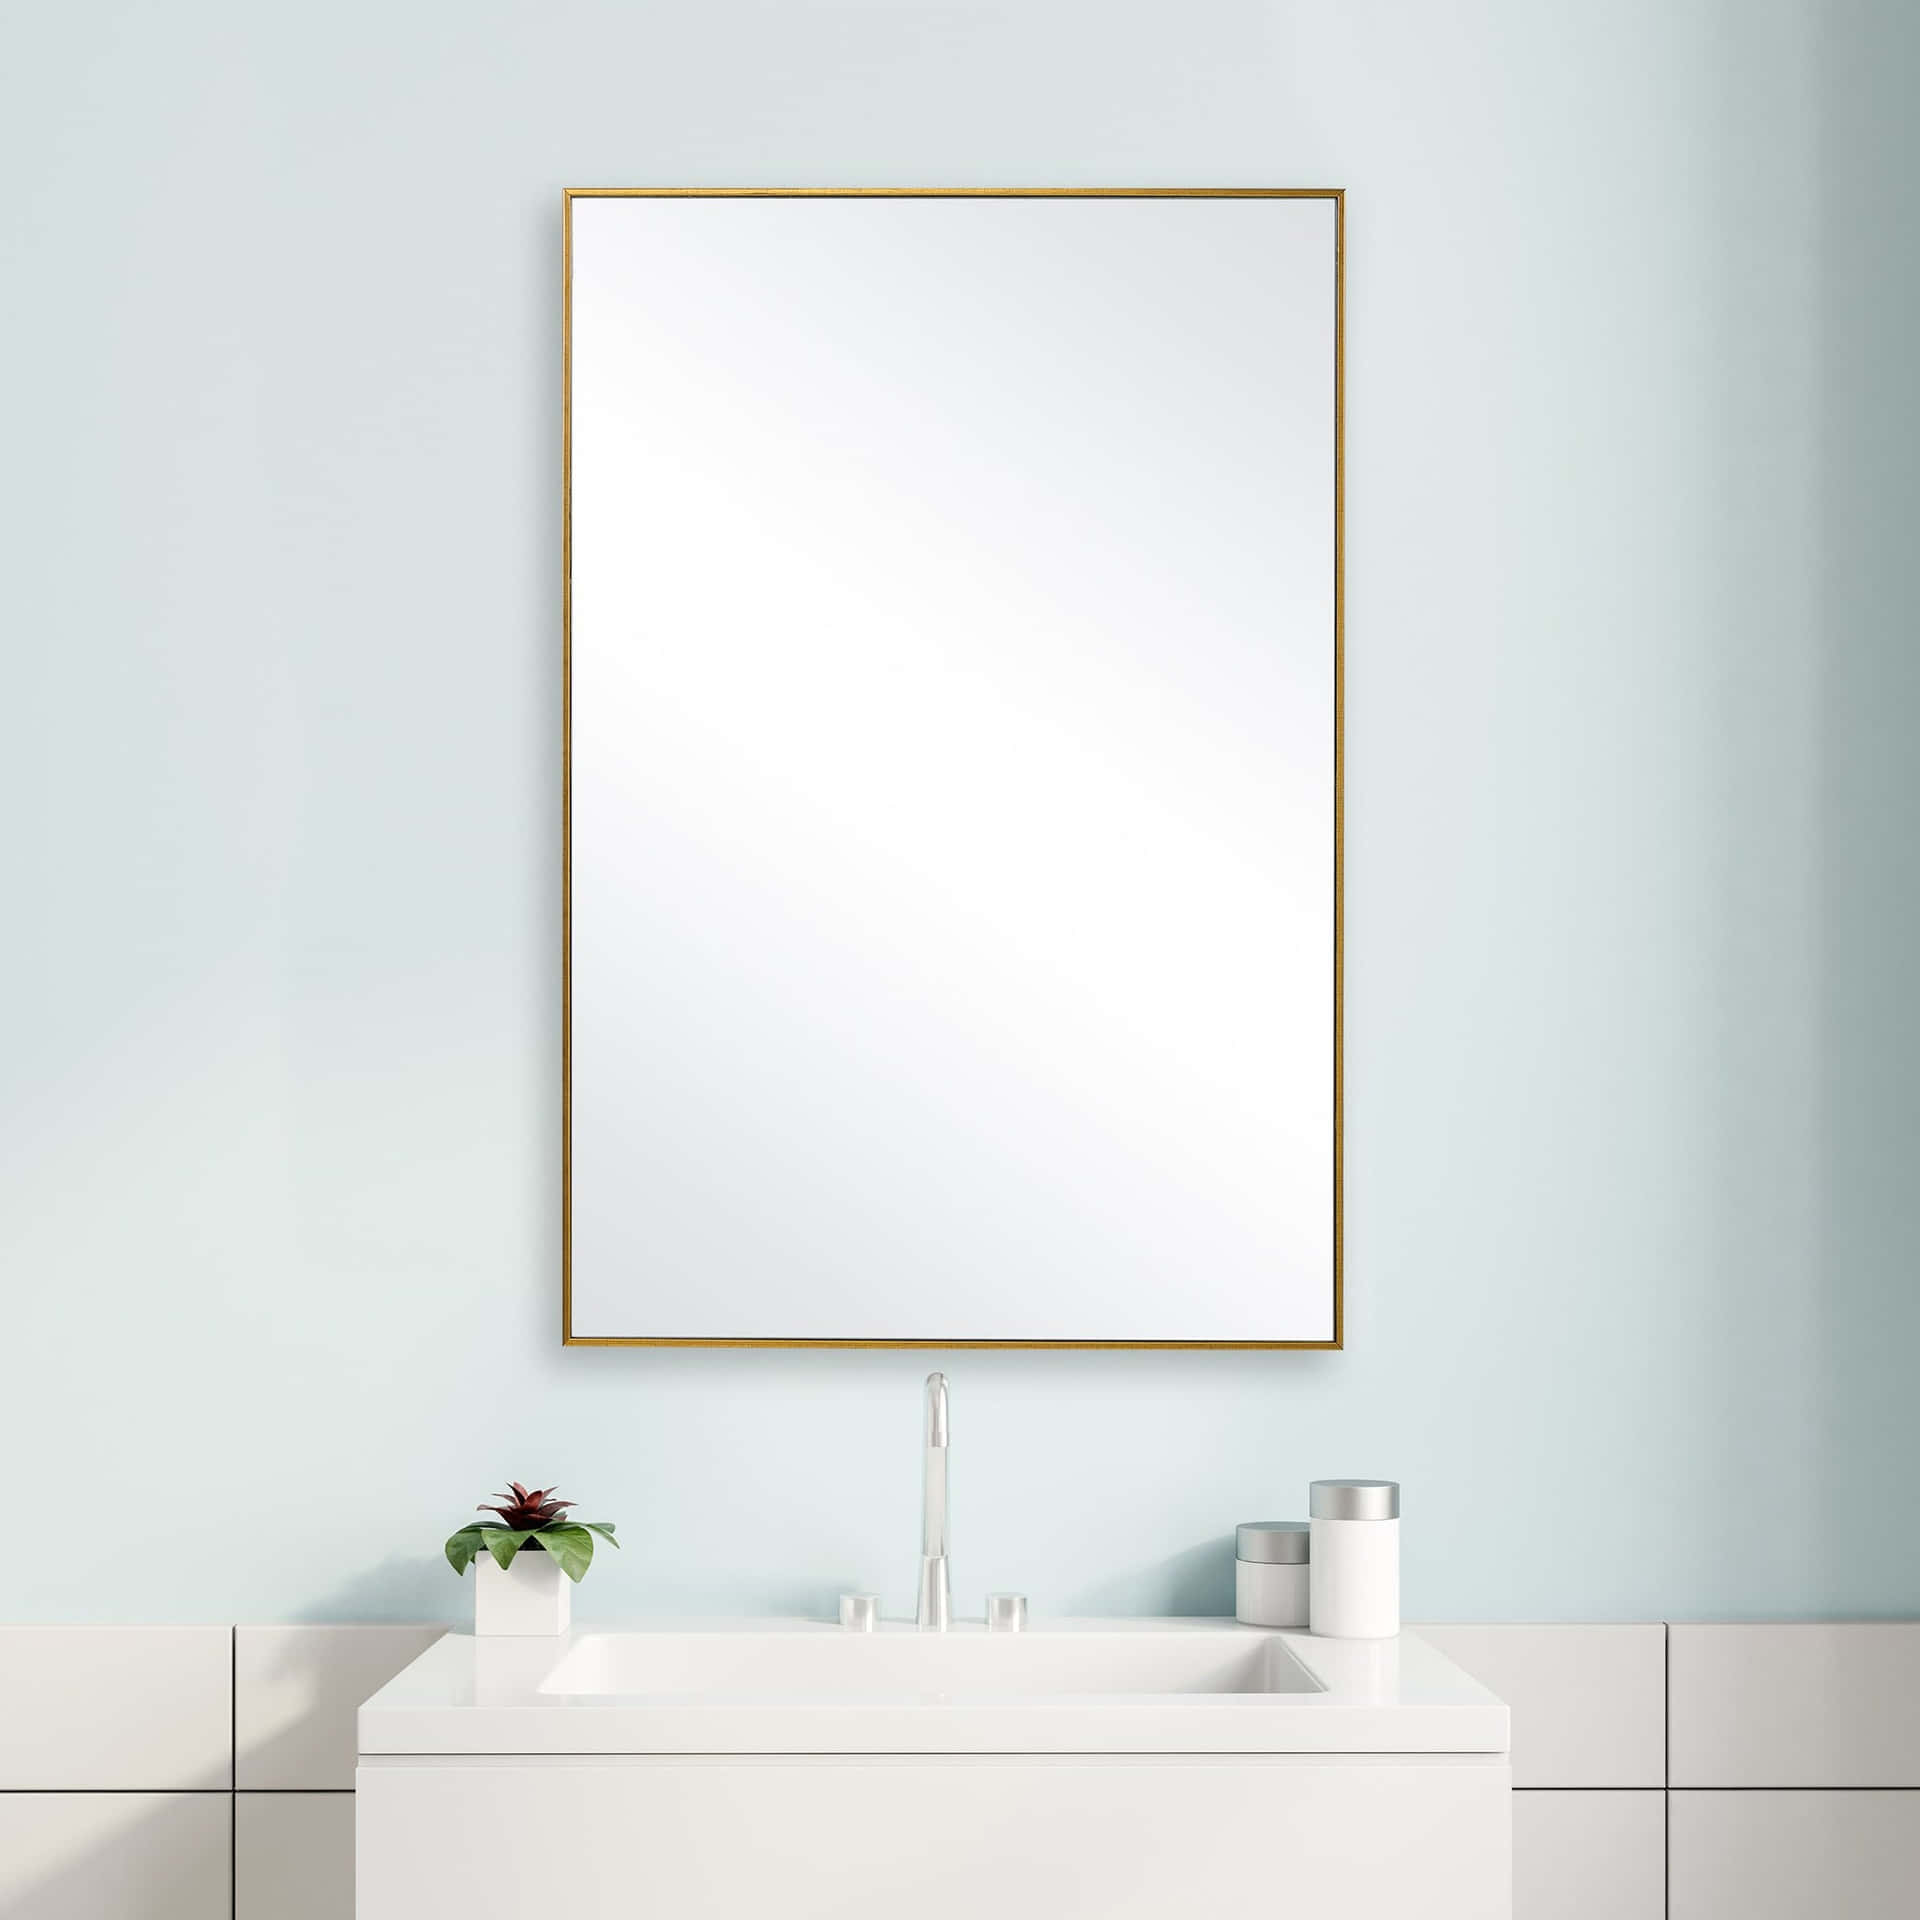 A Bathroom With A White Sink And A Gold Mirror